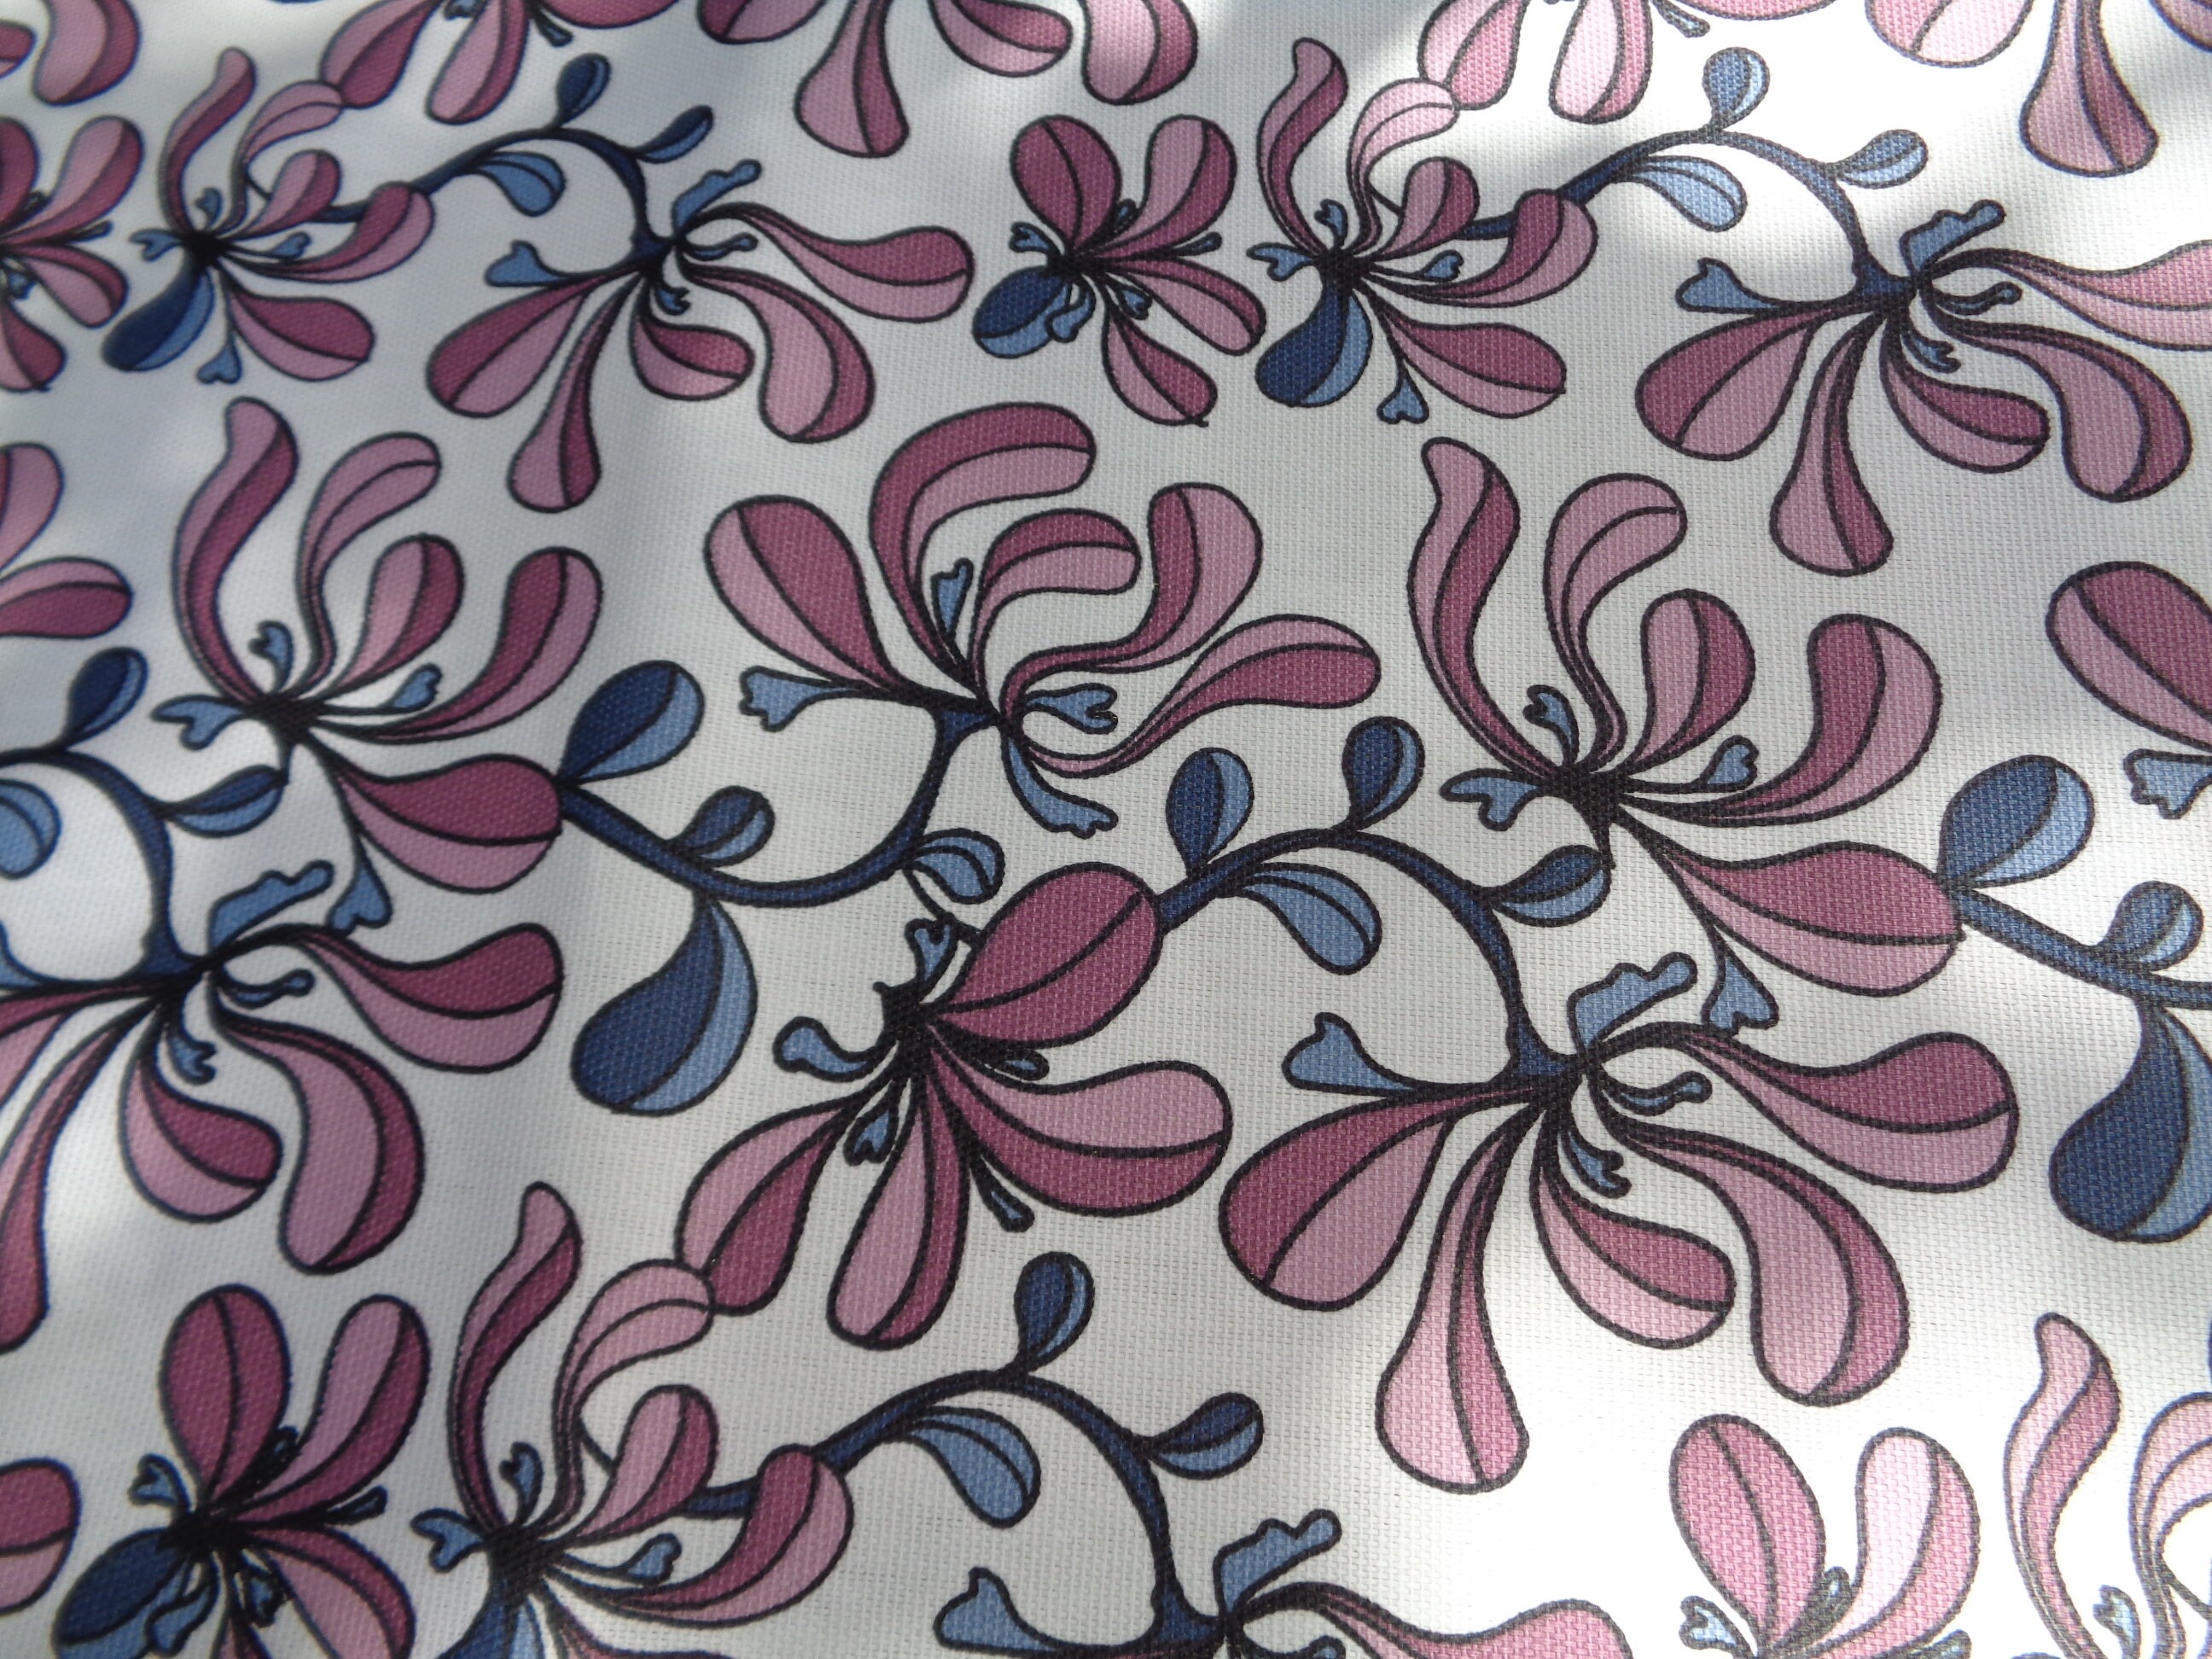 WATERPROOF 55 Square / Round Tablecloth Acrylic Coated - Etsy